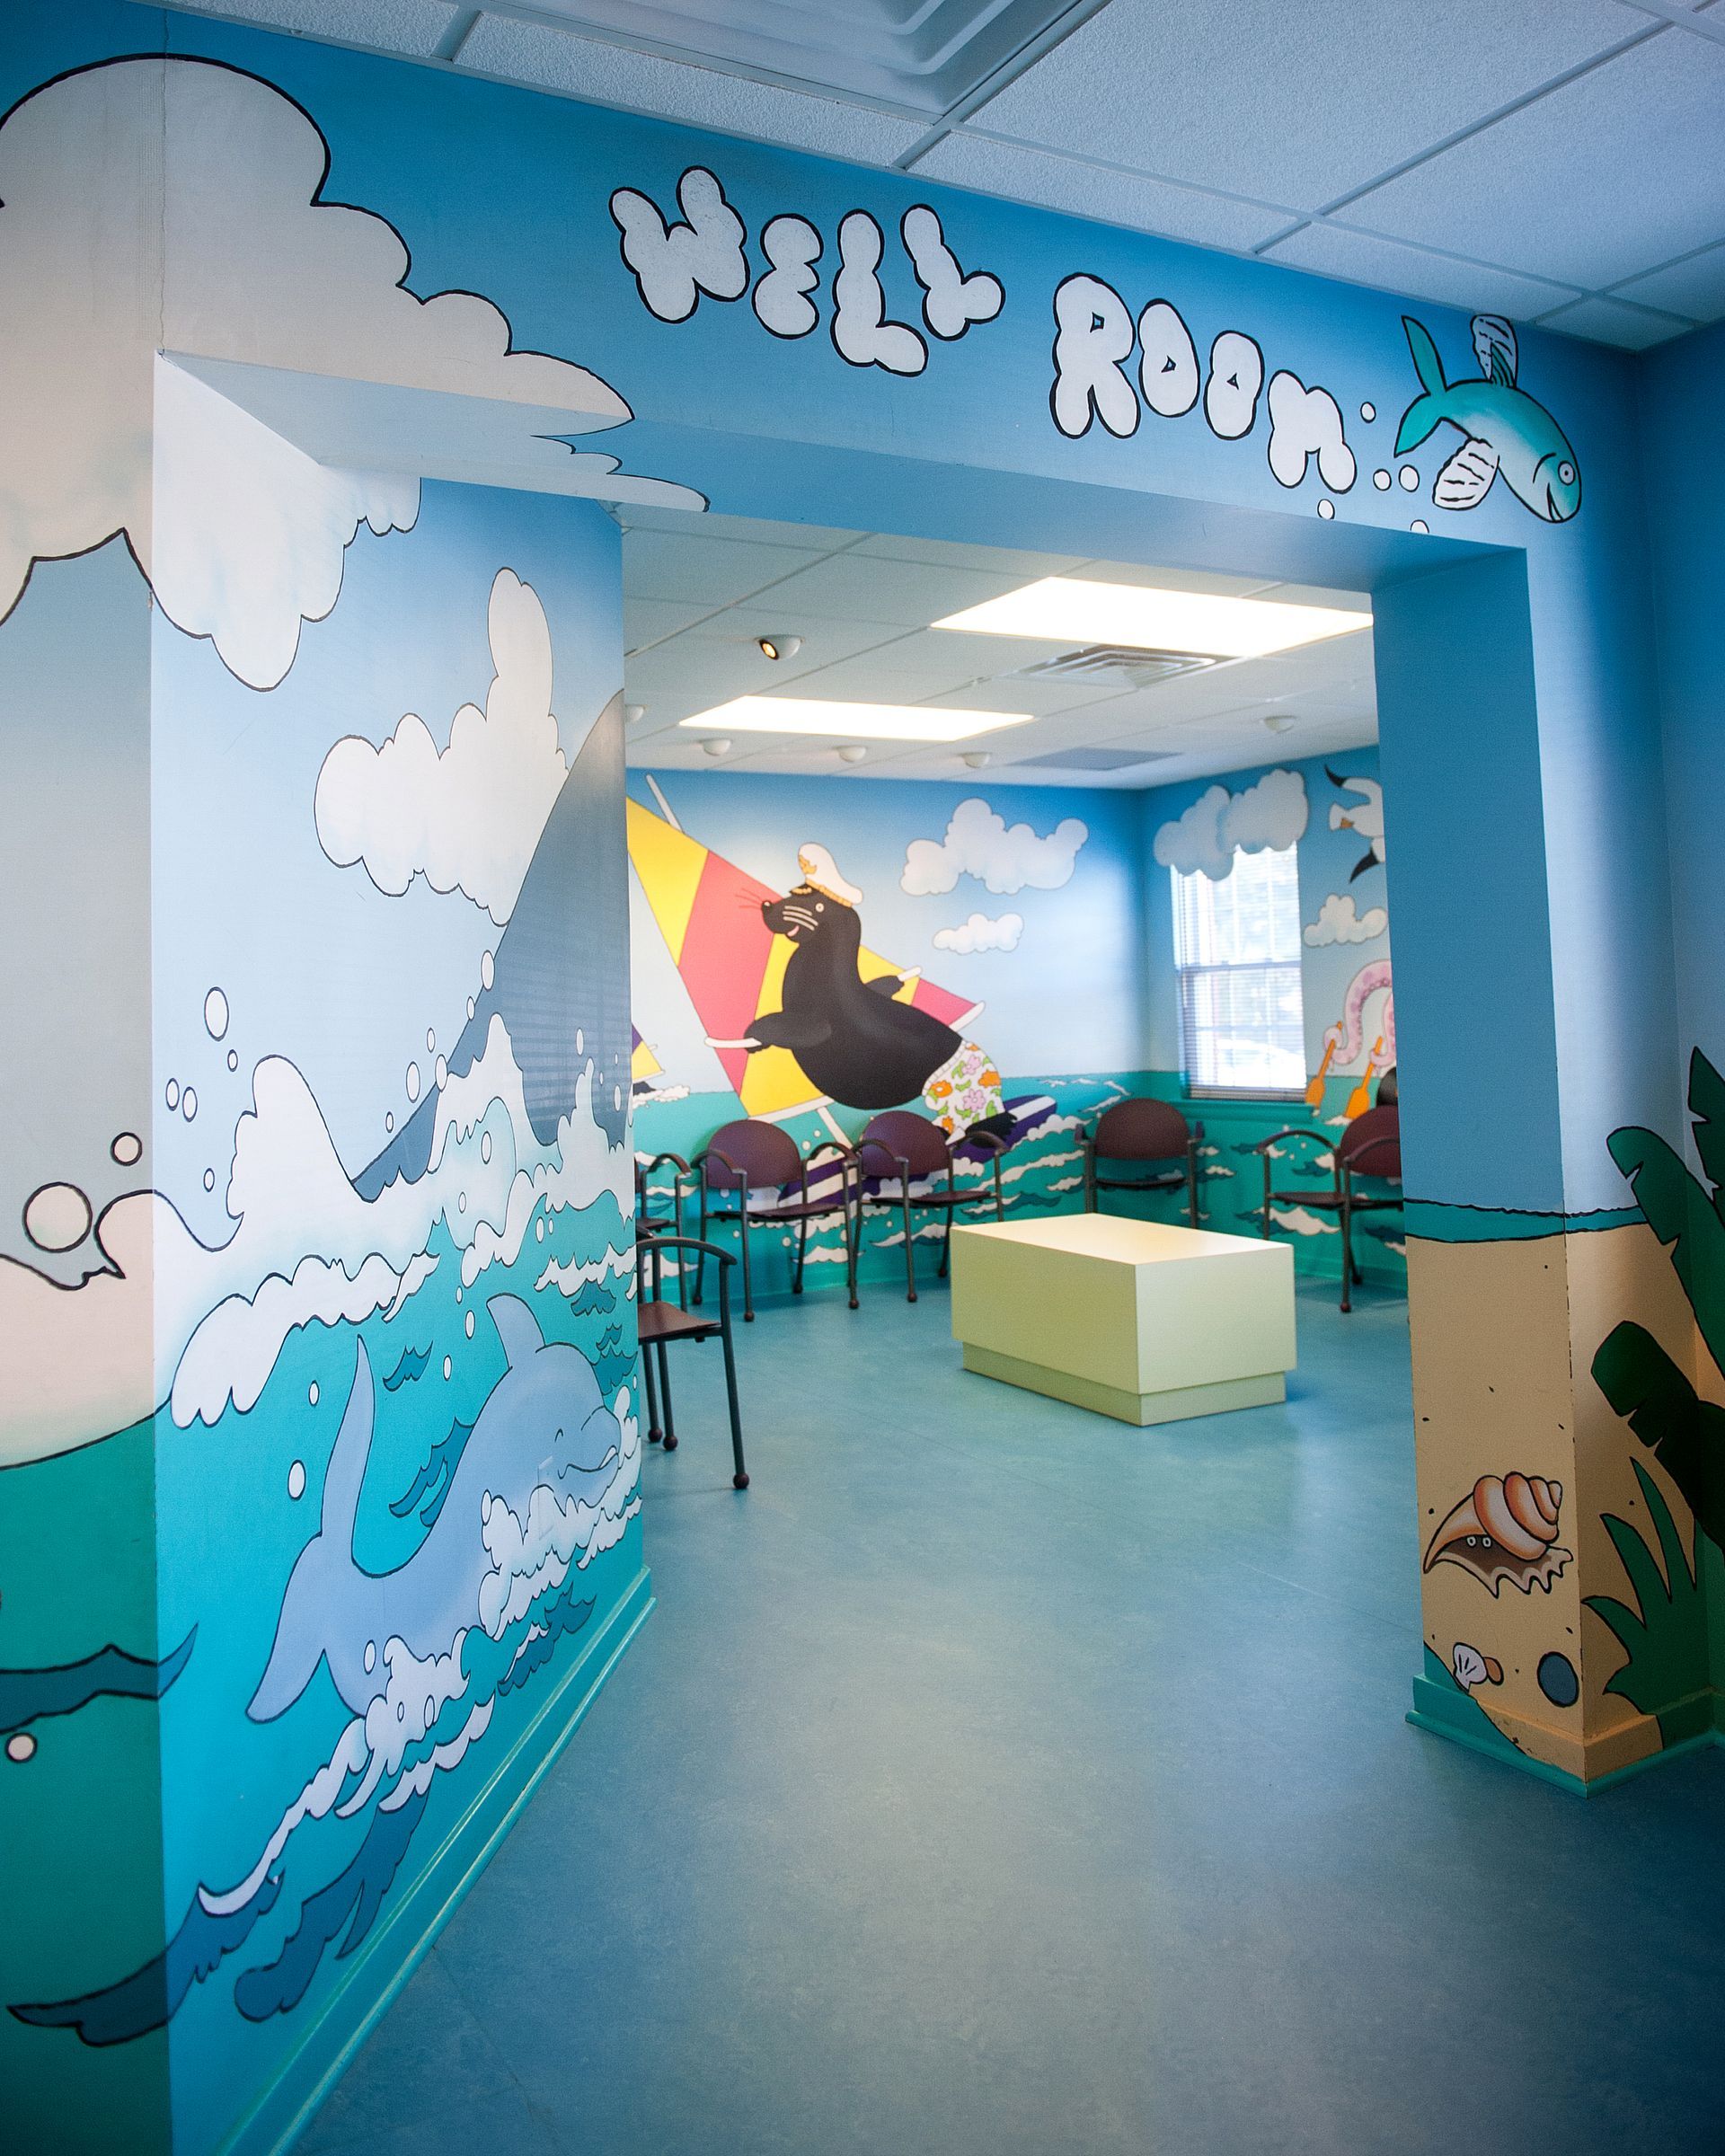 Well waiting area with colorful mural on the walls at a pediatricians office